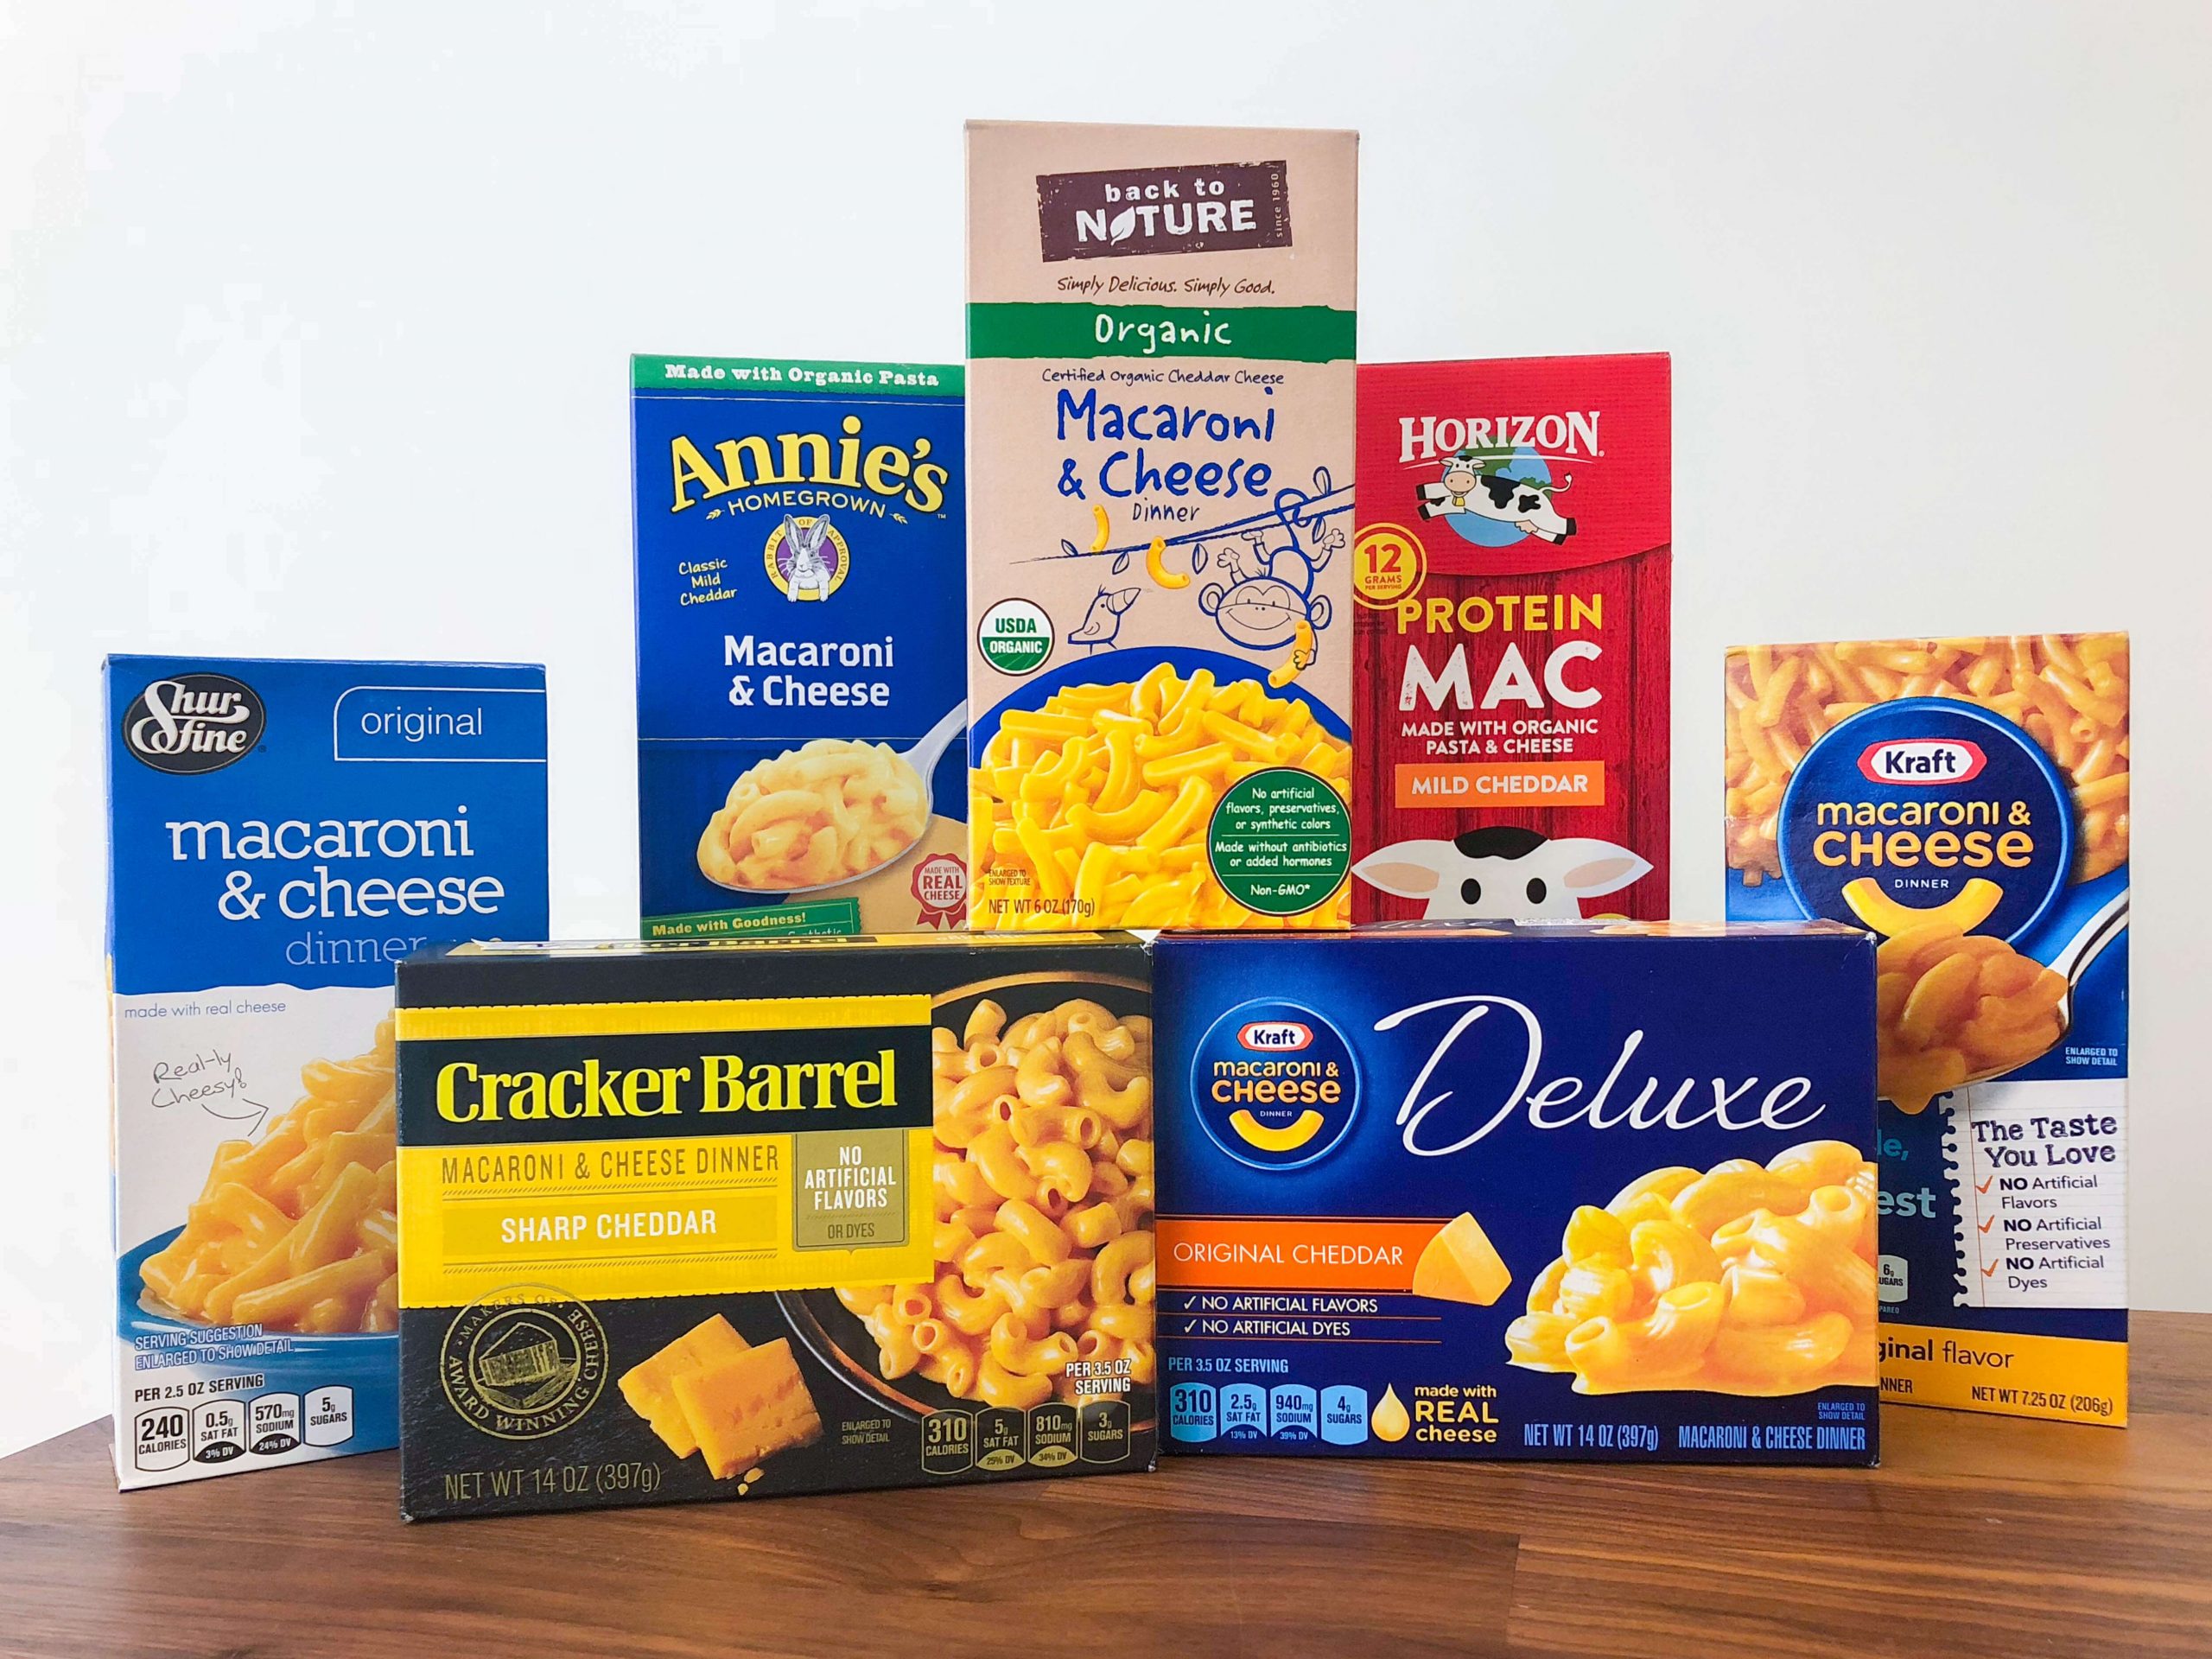 We Tried 7 Boxes to Find the Best Mac and Cheese